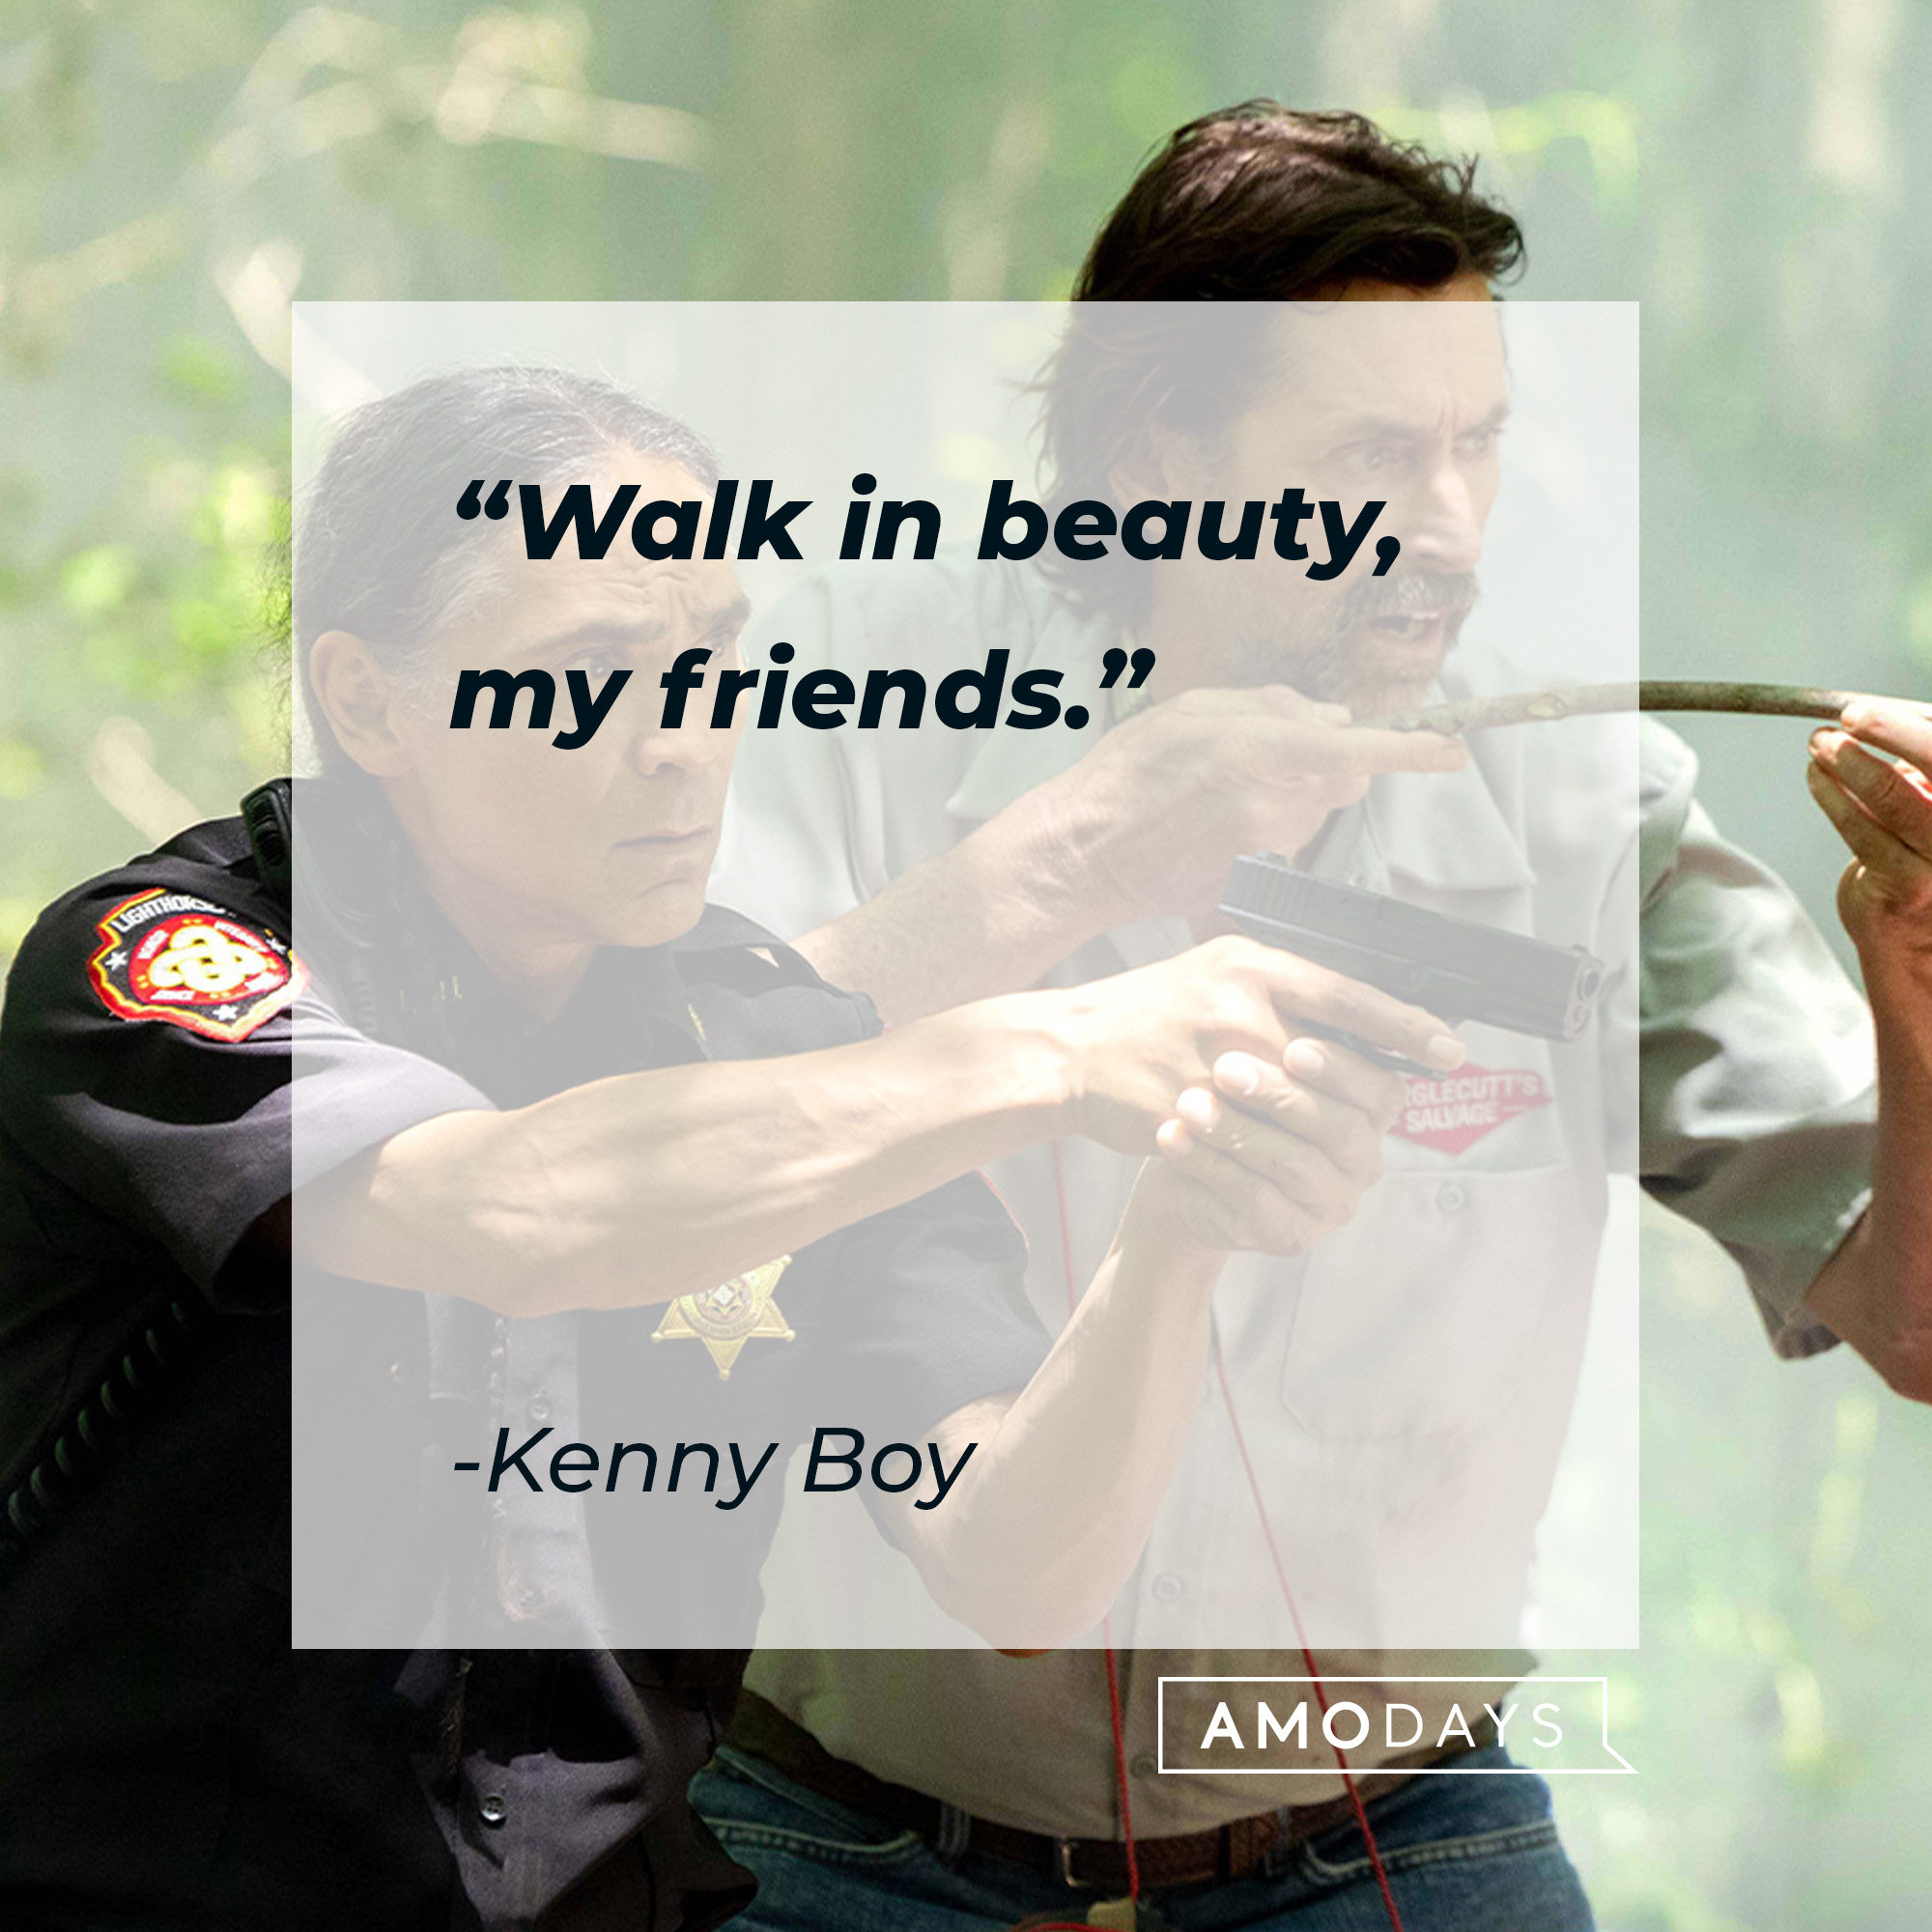 Officer Big and Kenny Boy, with Boy’s quote: “Walk in beauty, my friends.” | Source: Facebook.com/RezDogsFX